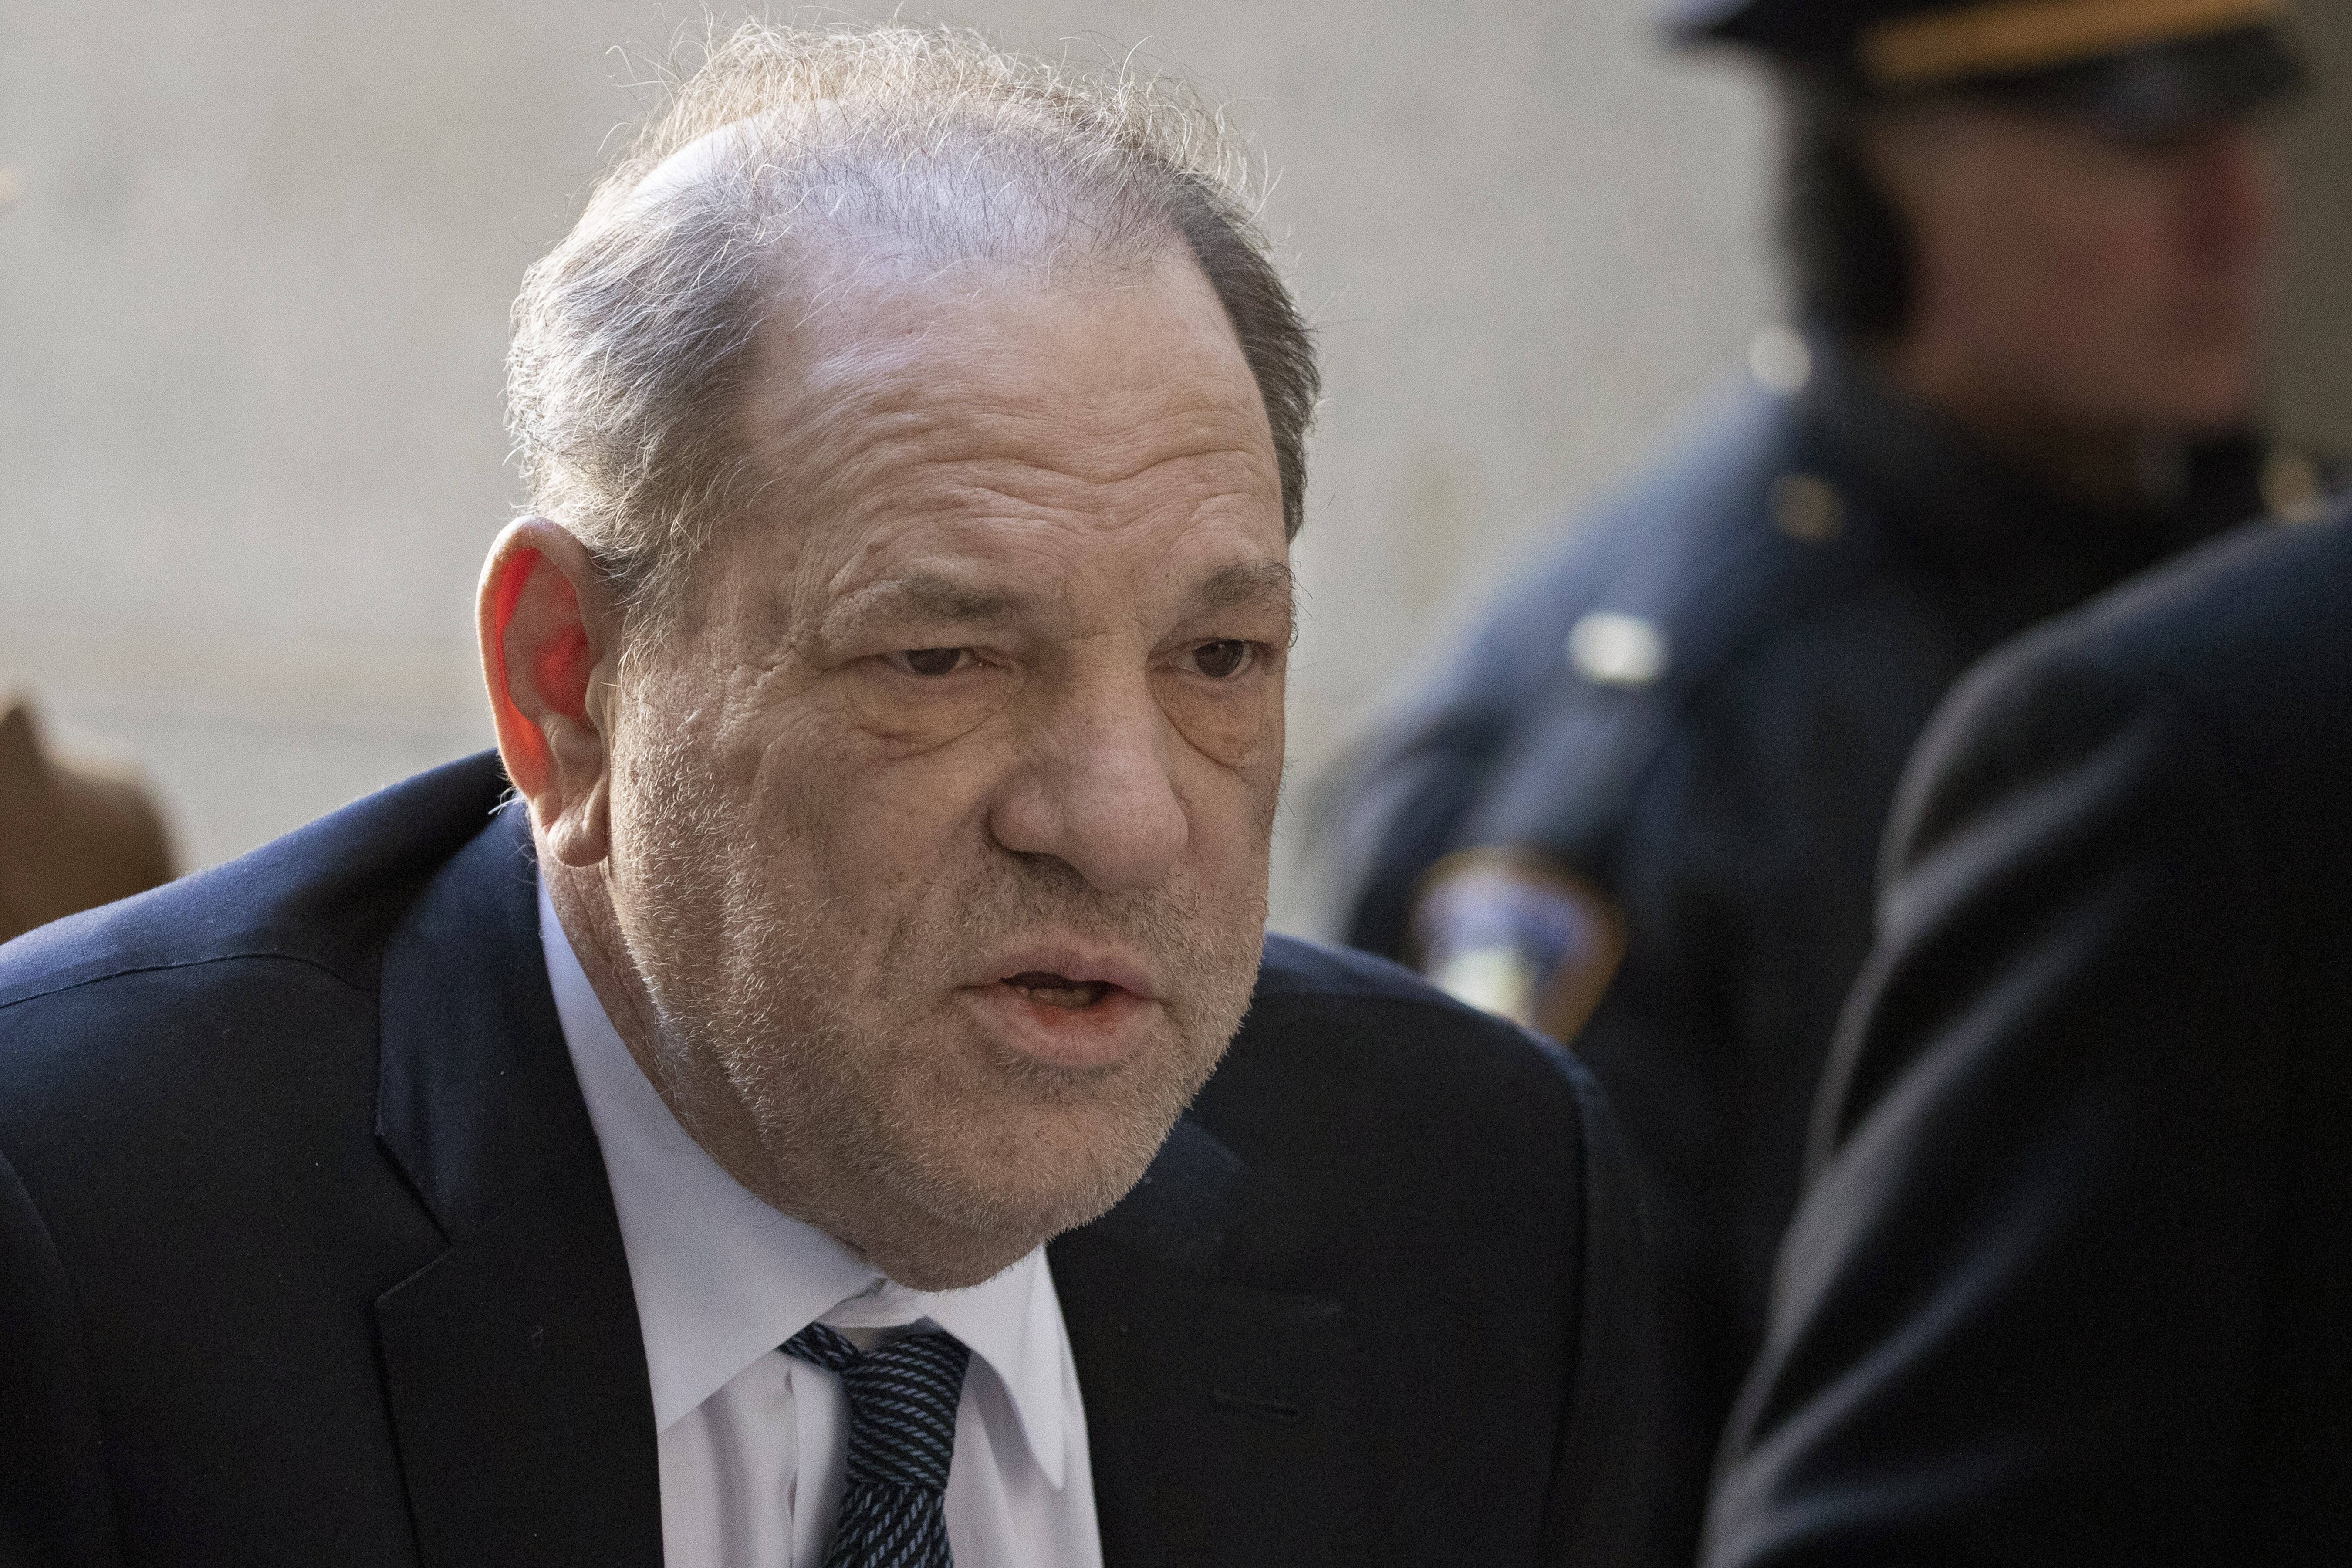 Harvey Weinstein is serving a 23-year prison sentence at a maximum-security prison near Buffalo after convictions in February for the rape and sexual assault of two women. Photo: AP